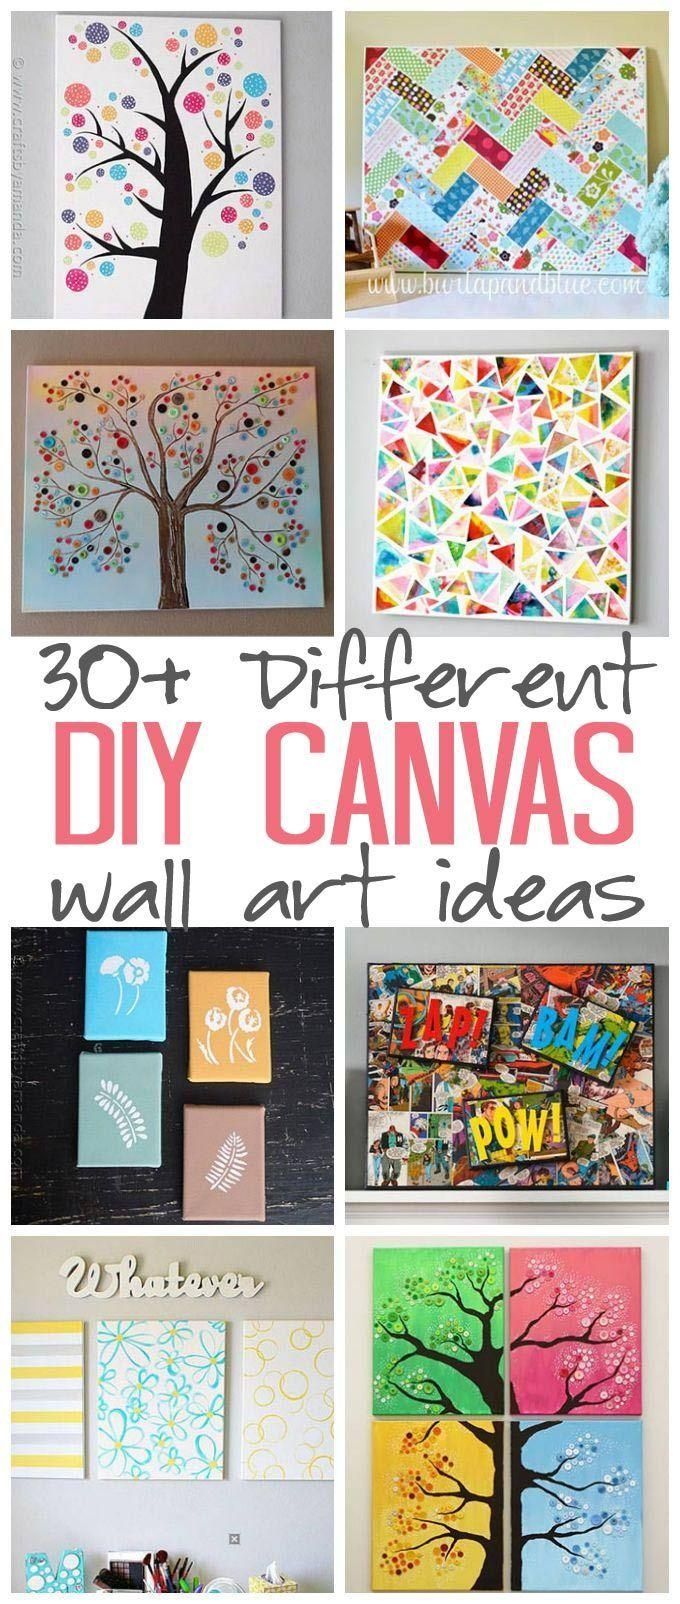 Best 25+ Diy Canvas Art Ideas On Pinterest | Diy Canvas, Diy For Diy Canvas Wall Art Quotes (View 19 of 20)